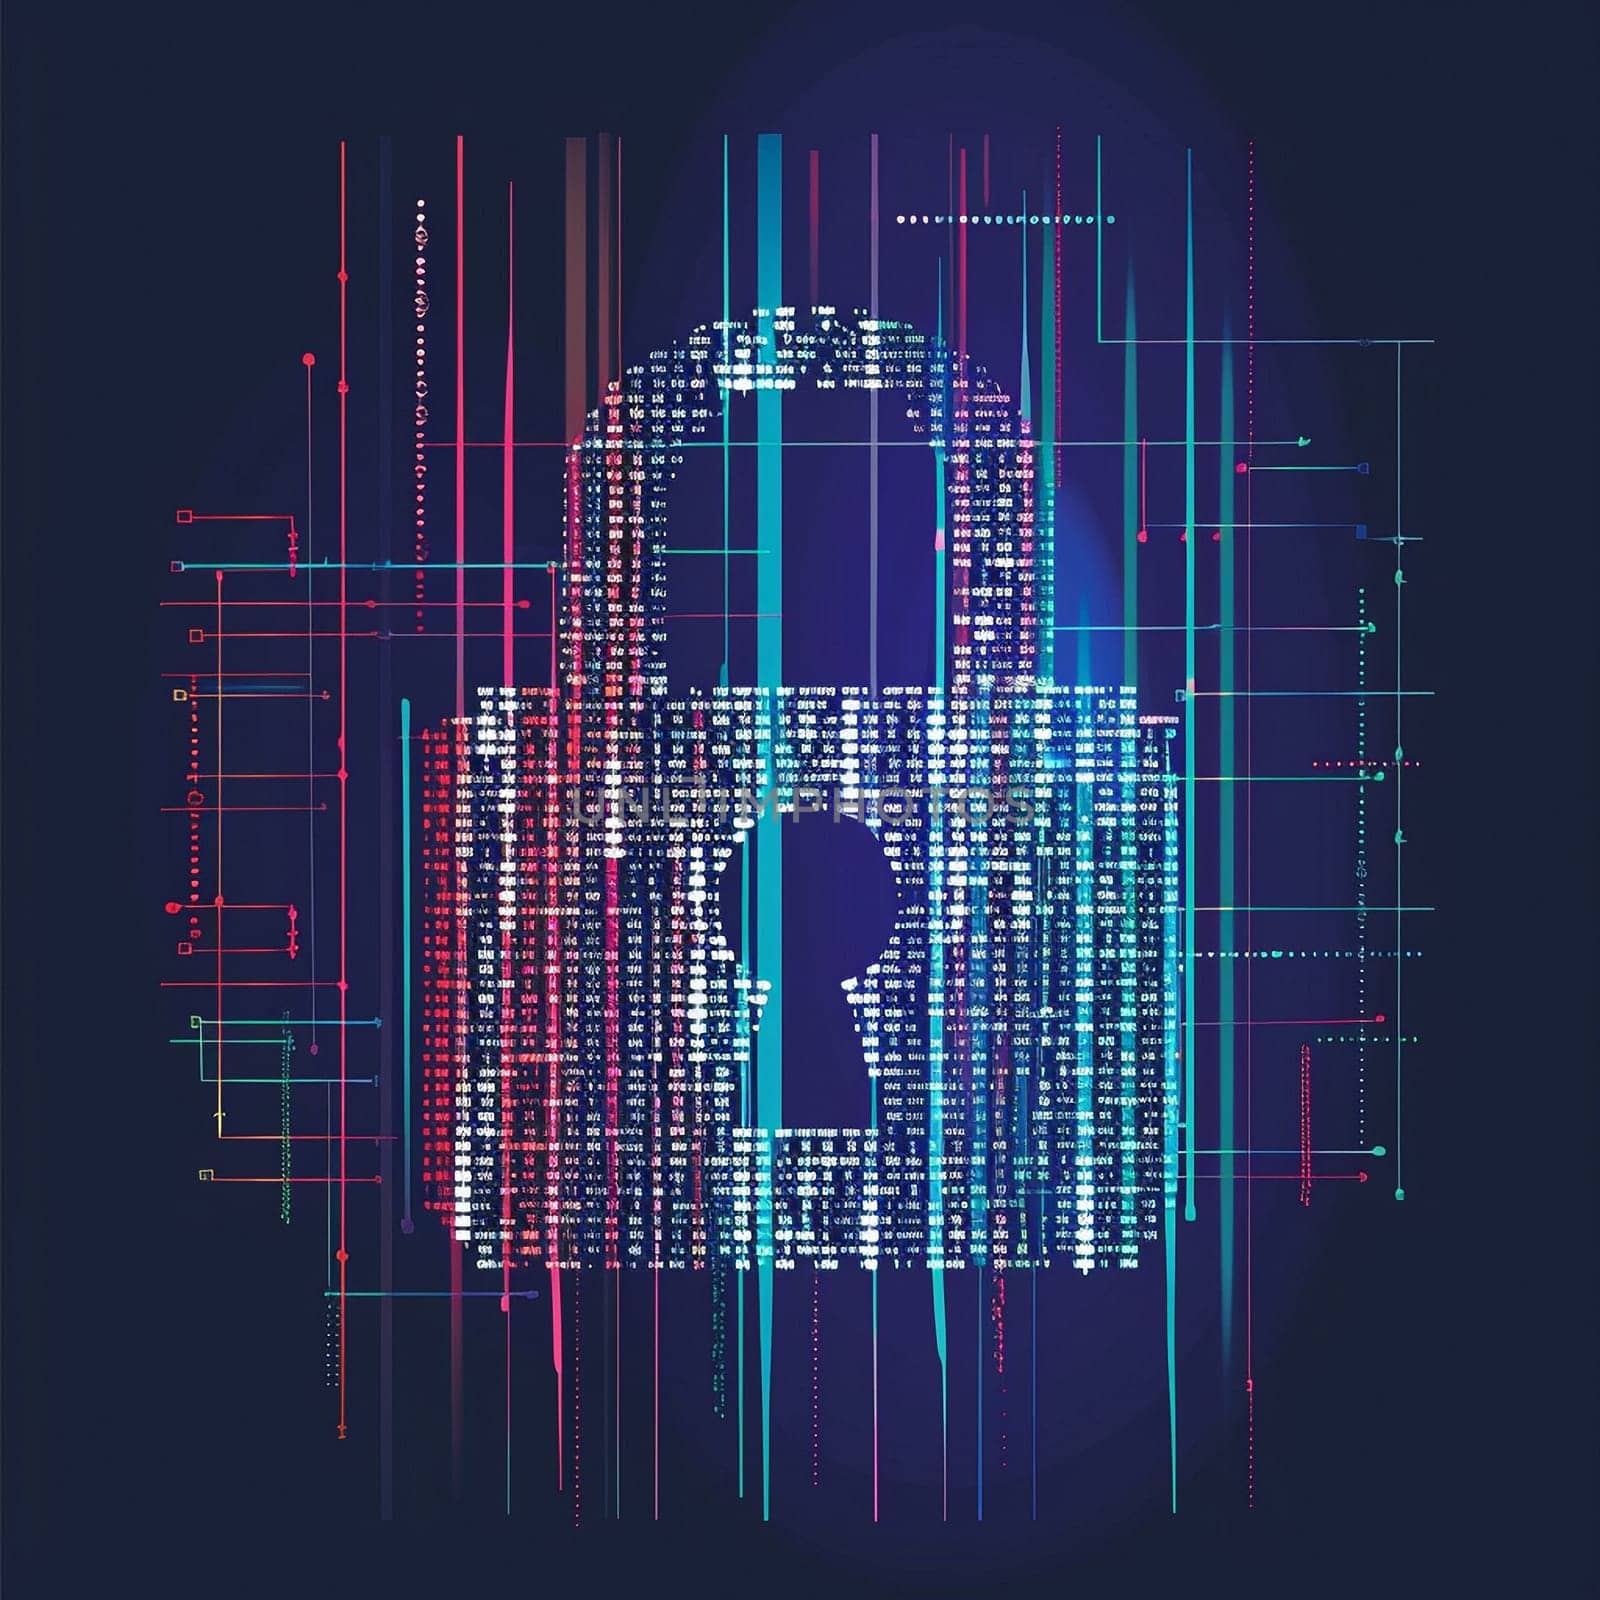 Cyber security document cover graphic for government. High quality illustration